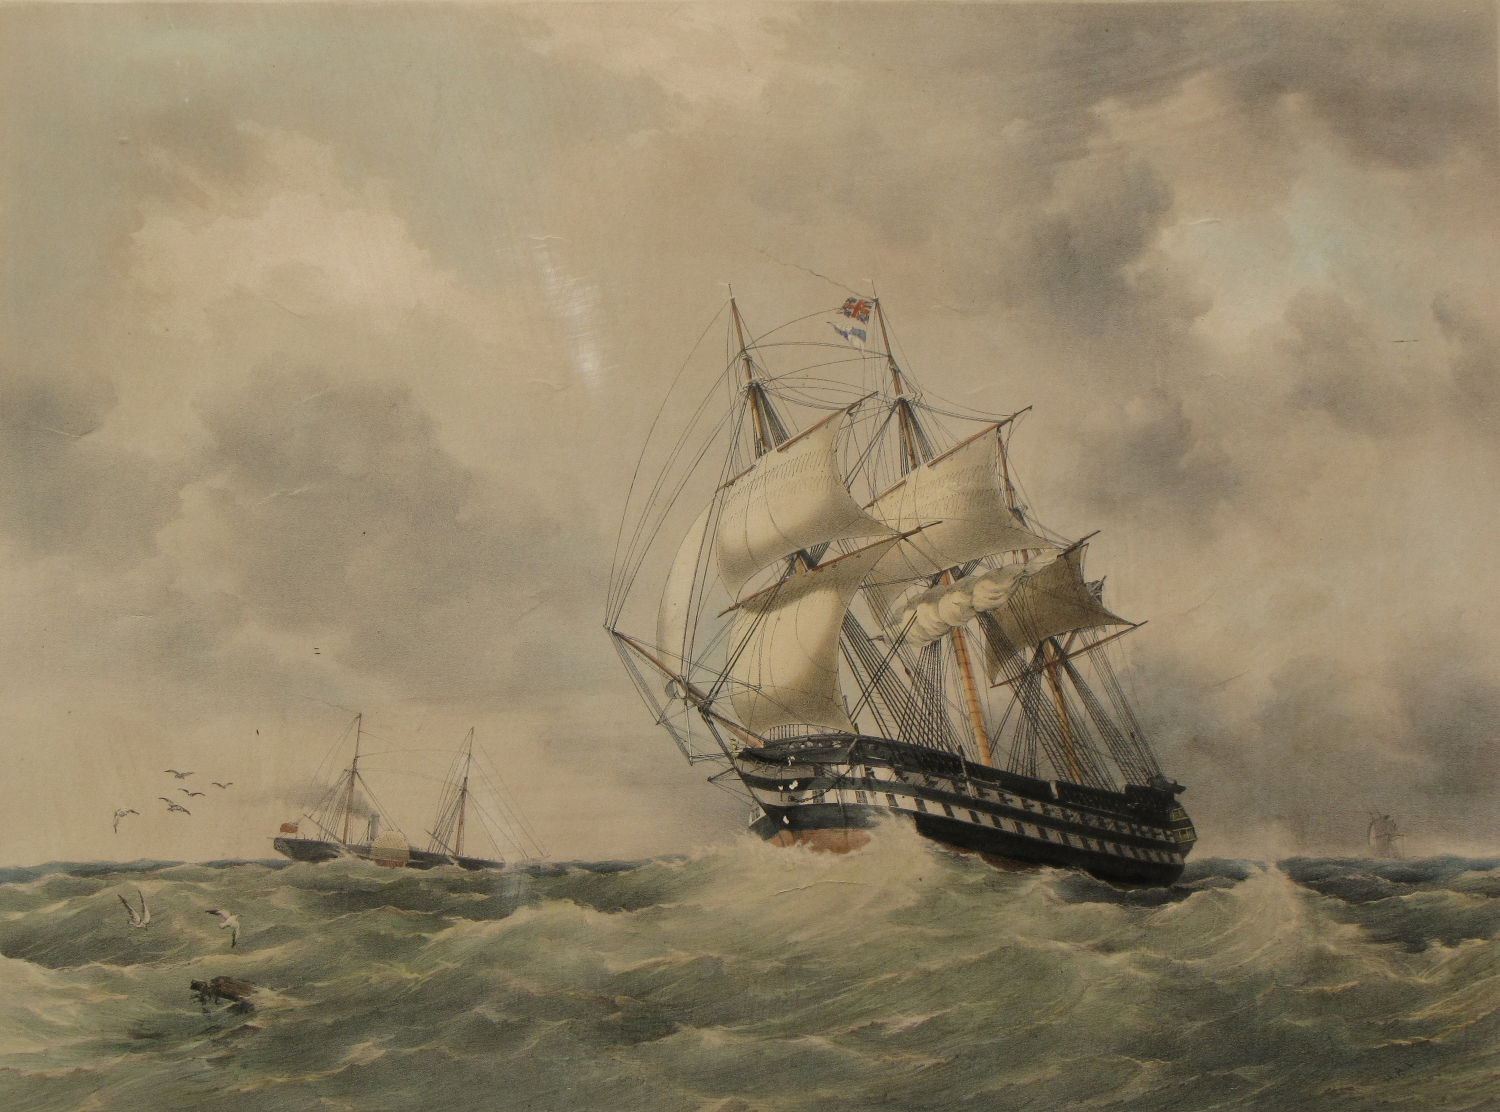 Hand-coloured lithograph of HMS Canopus